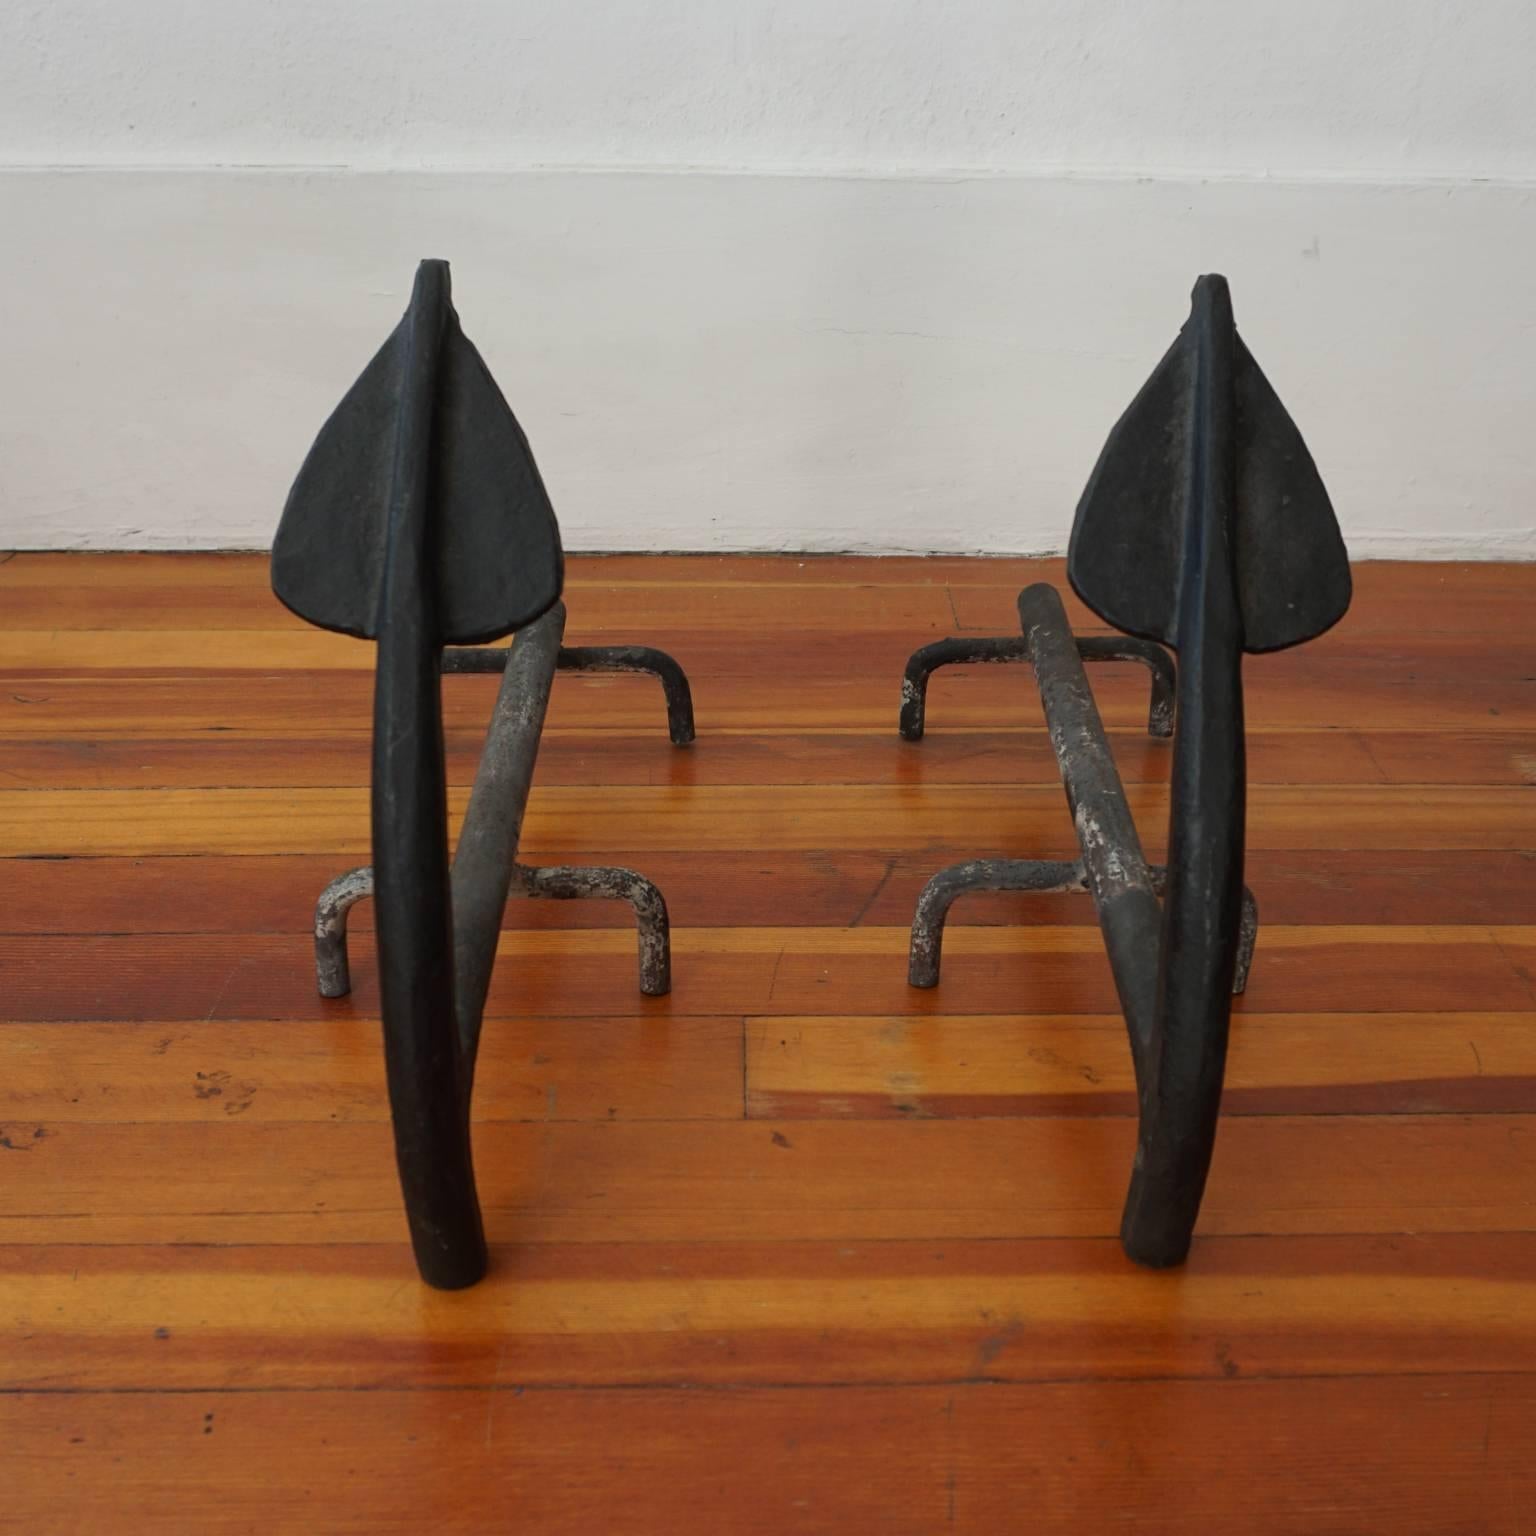 Unknown 1940s Fireplace Andirons